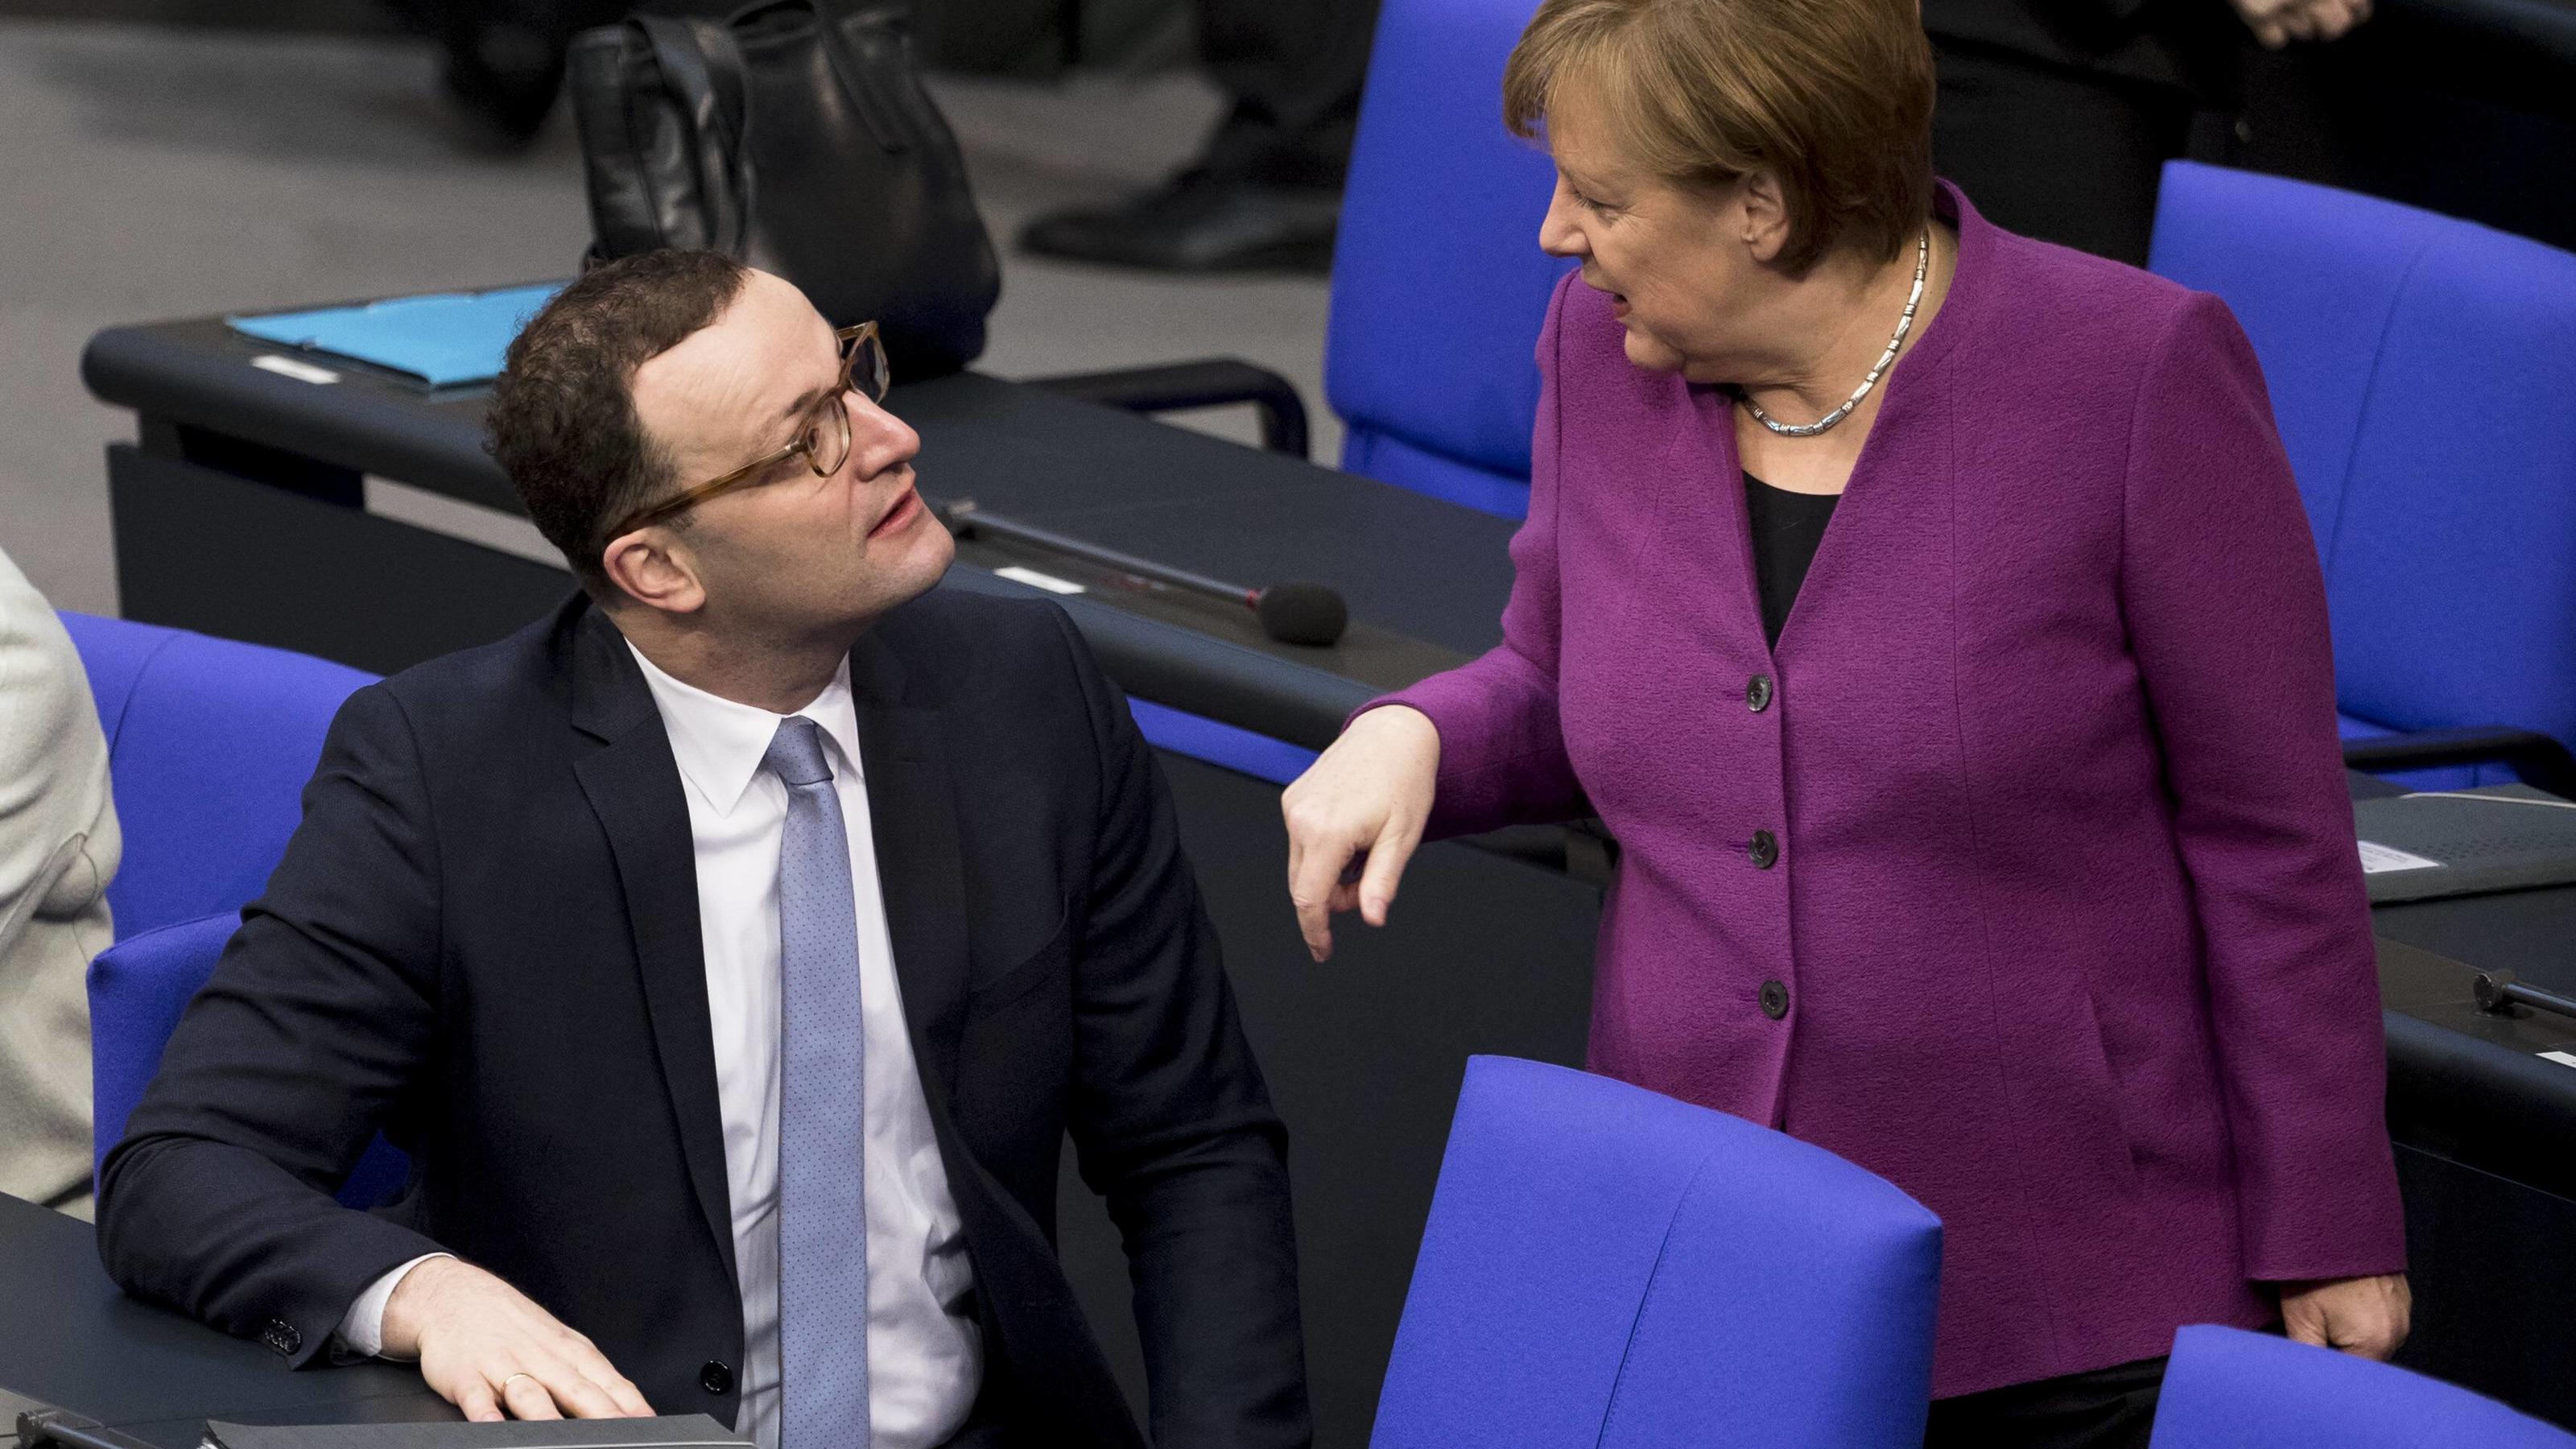 February 22, 2018 - Berlin, Germany - German Chancellor Angela Merkel (R) speaks with Jens Spahn (L) as she arrives to the 14. plenary session at Bundestag (lower house of parliament) in Berlin, Germany on February 22, 2018. Berlin Germany PUBLICATIO